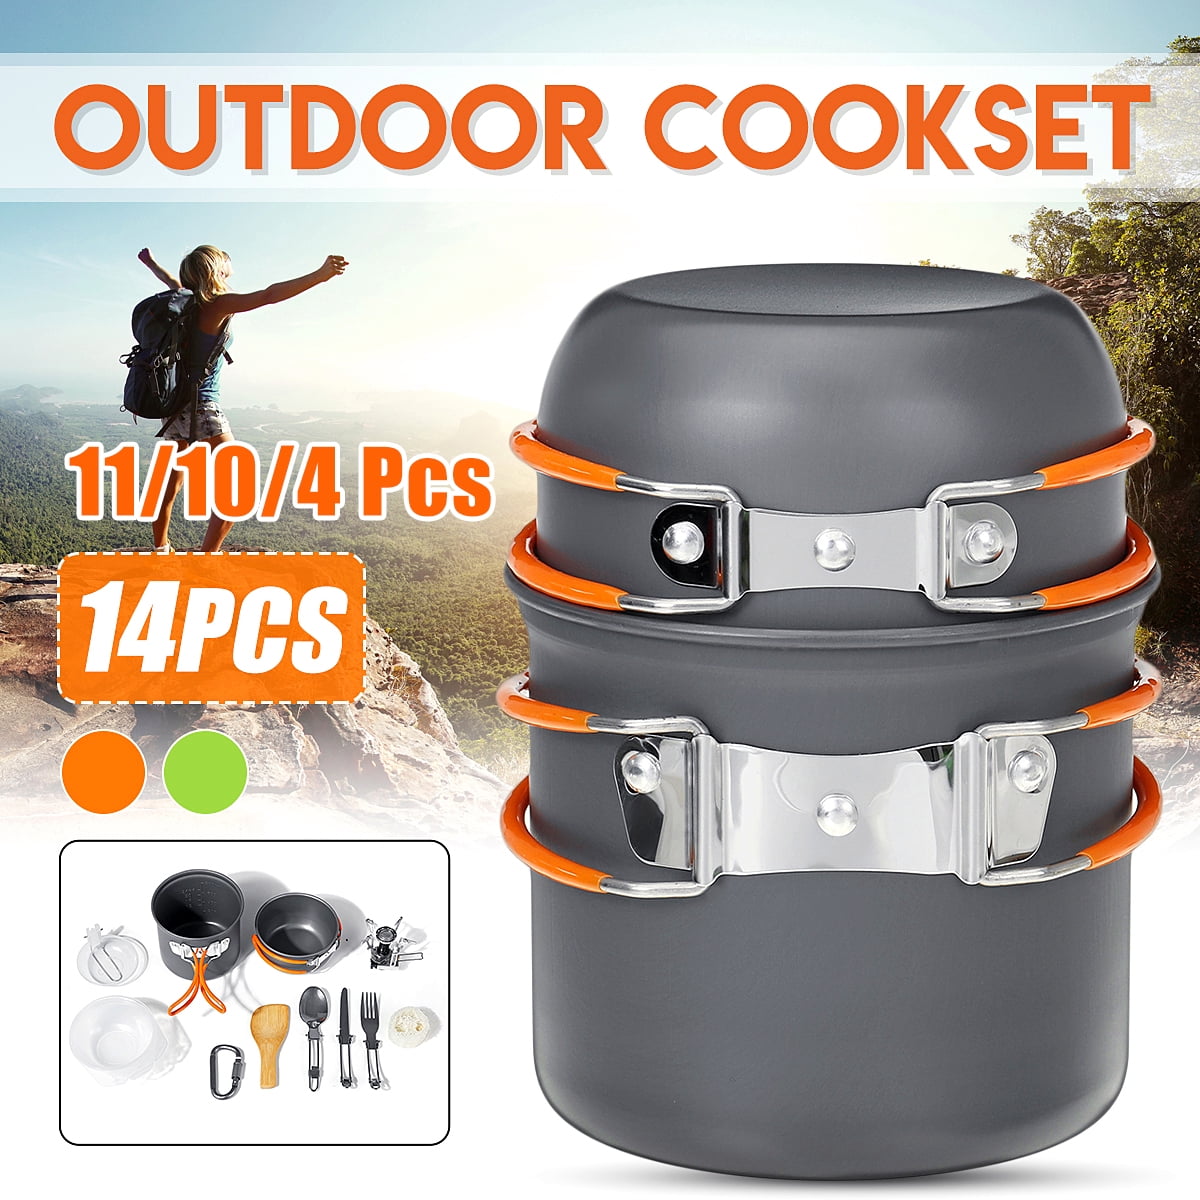 Odoland Bundle 2 Items Portable LED Camping Lantern with Ceiling Fan and 16pcs Camping Cookware Mess Kit with Mini Stove 